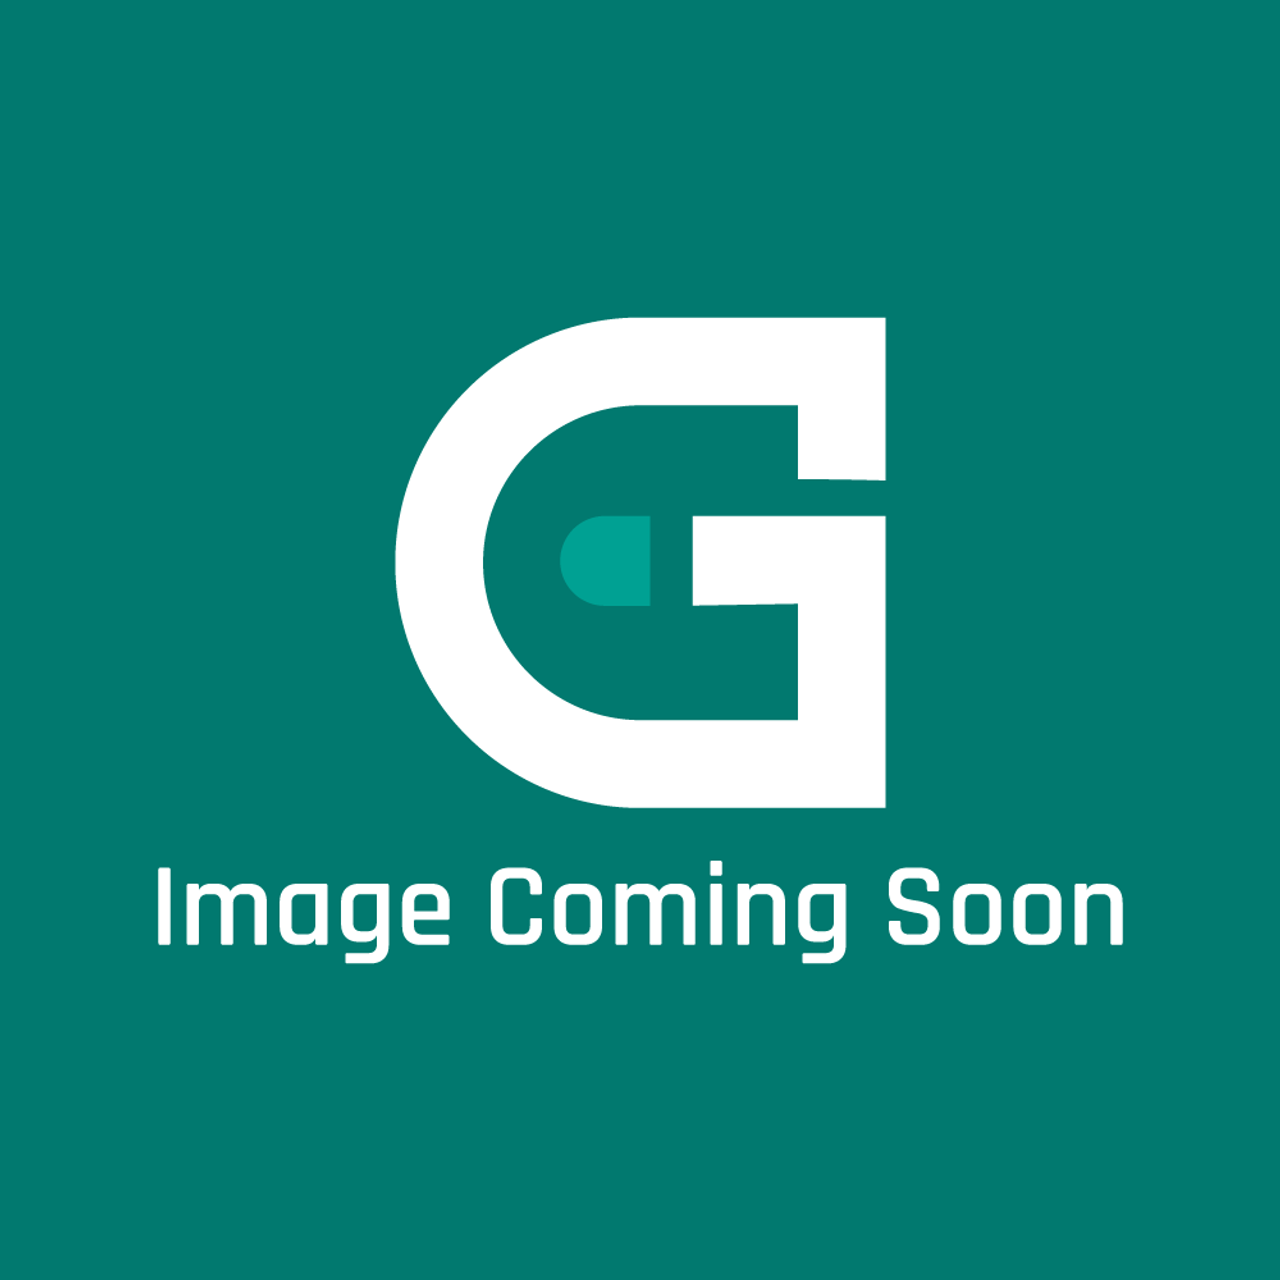 Frigidaire - Electrolux 316560156 Controller - Image Coming Soon!